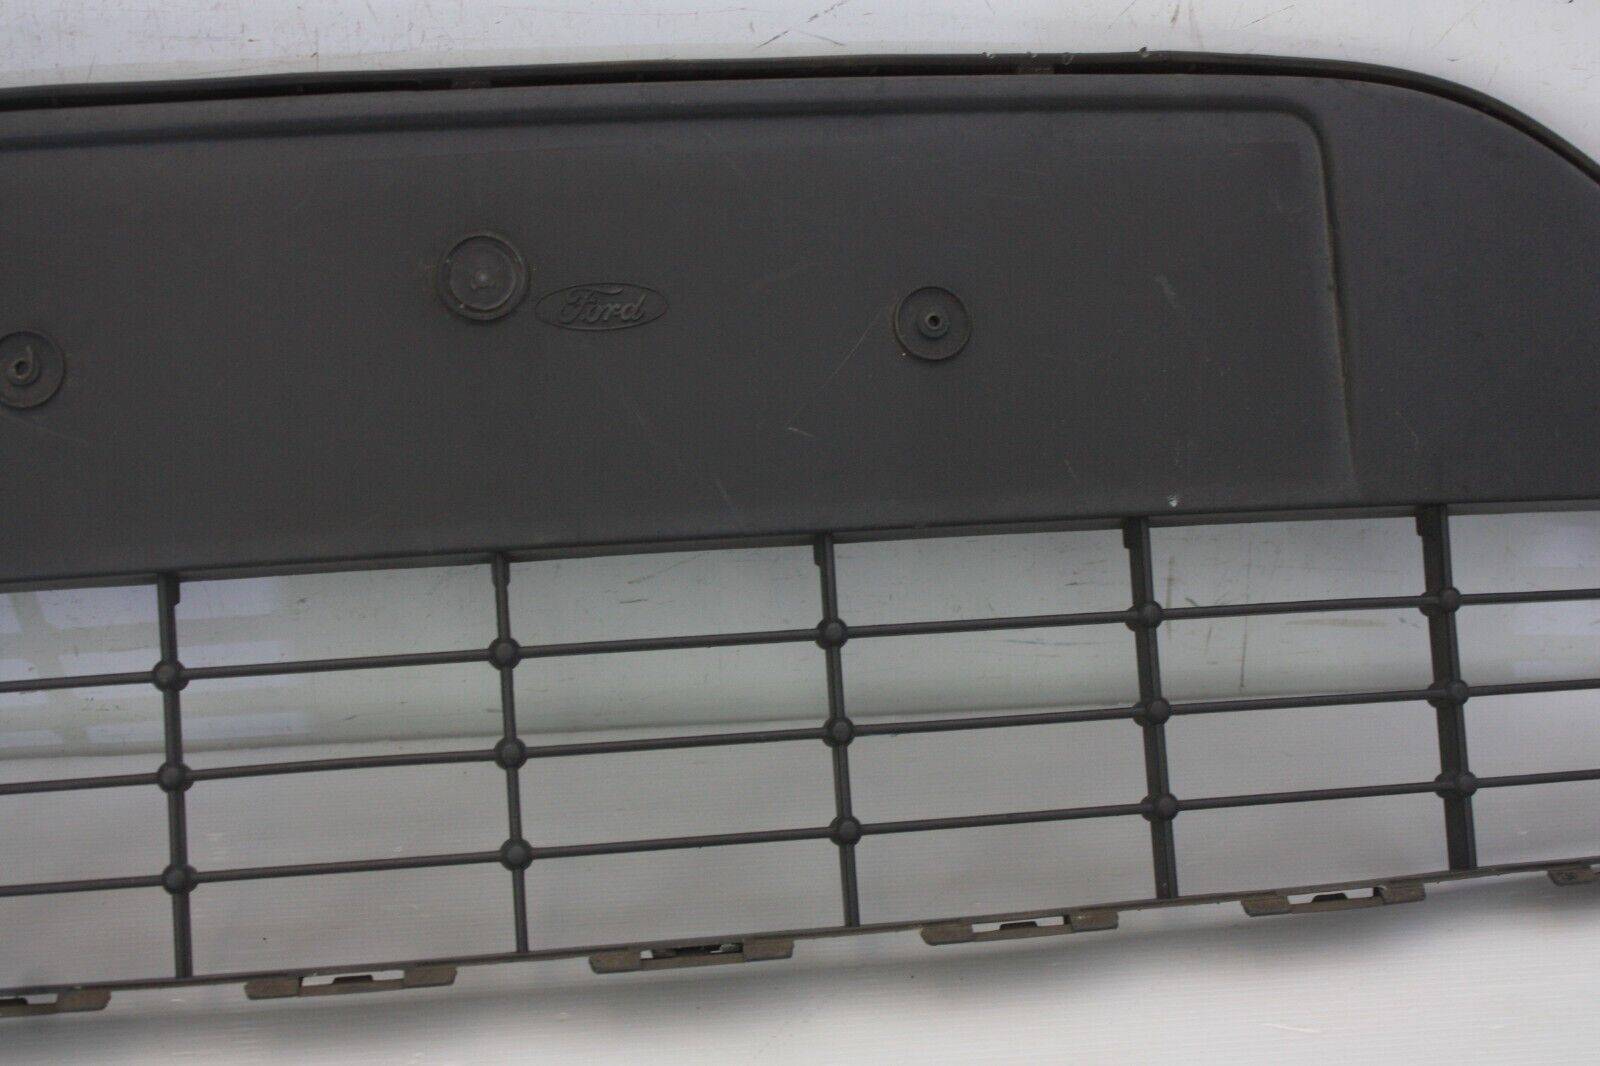 Ford-Focus-Front-Bumper-Grill-2008-TO-2011-8M51-17B968-BE-Genuine-SEE-PICS-175622452576-3